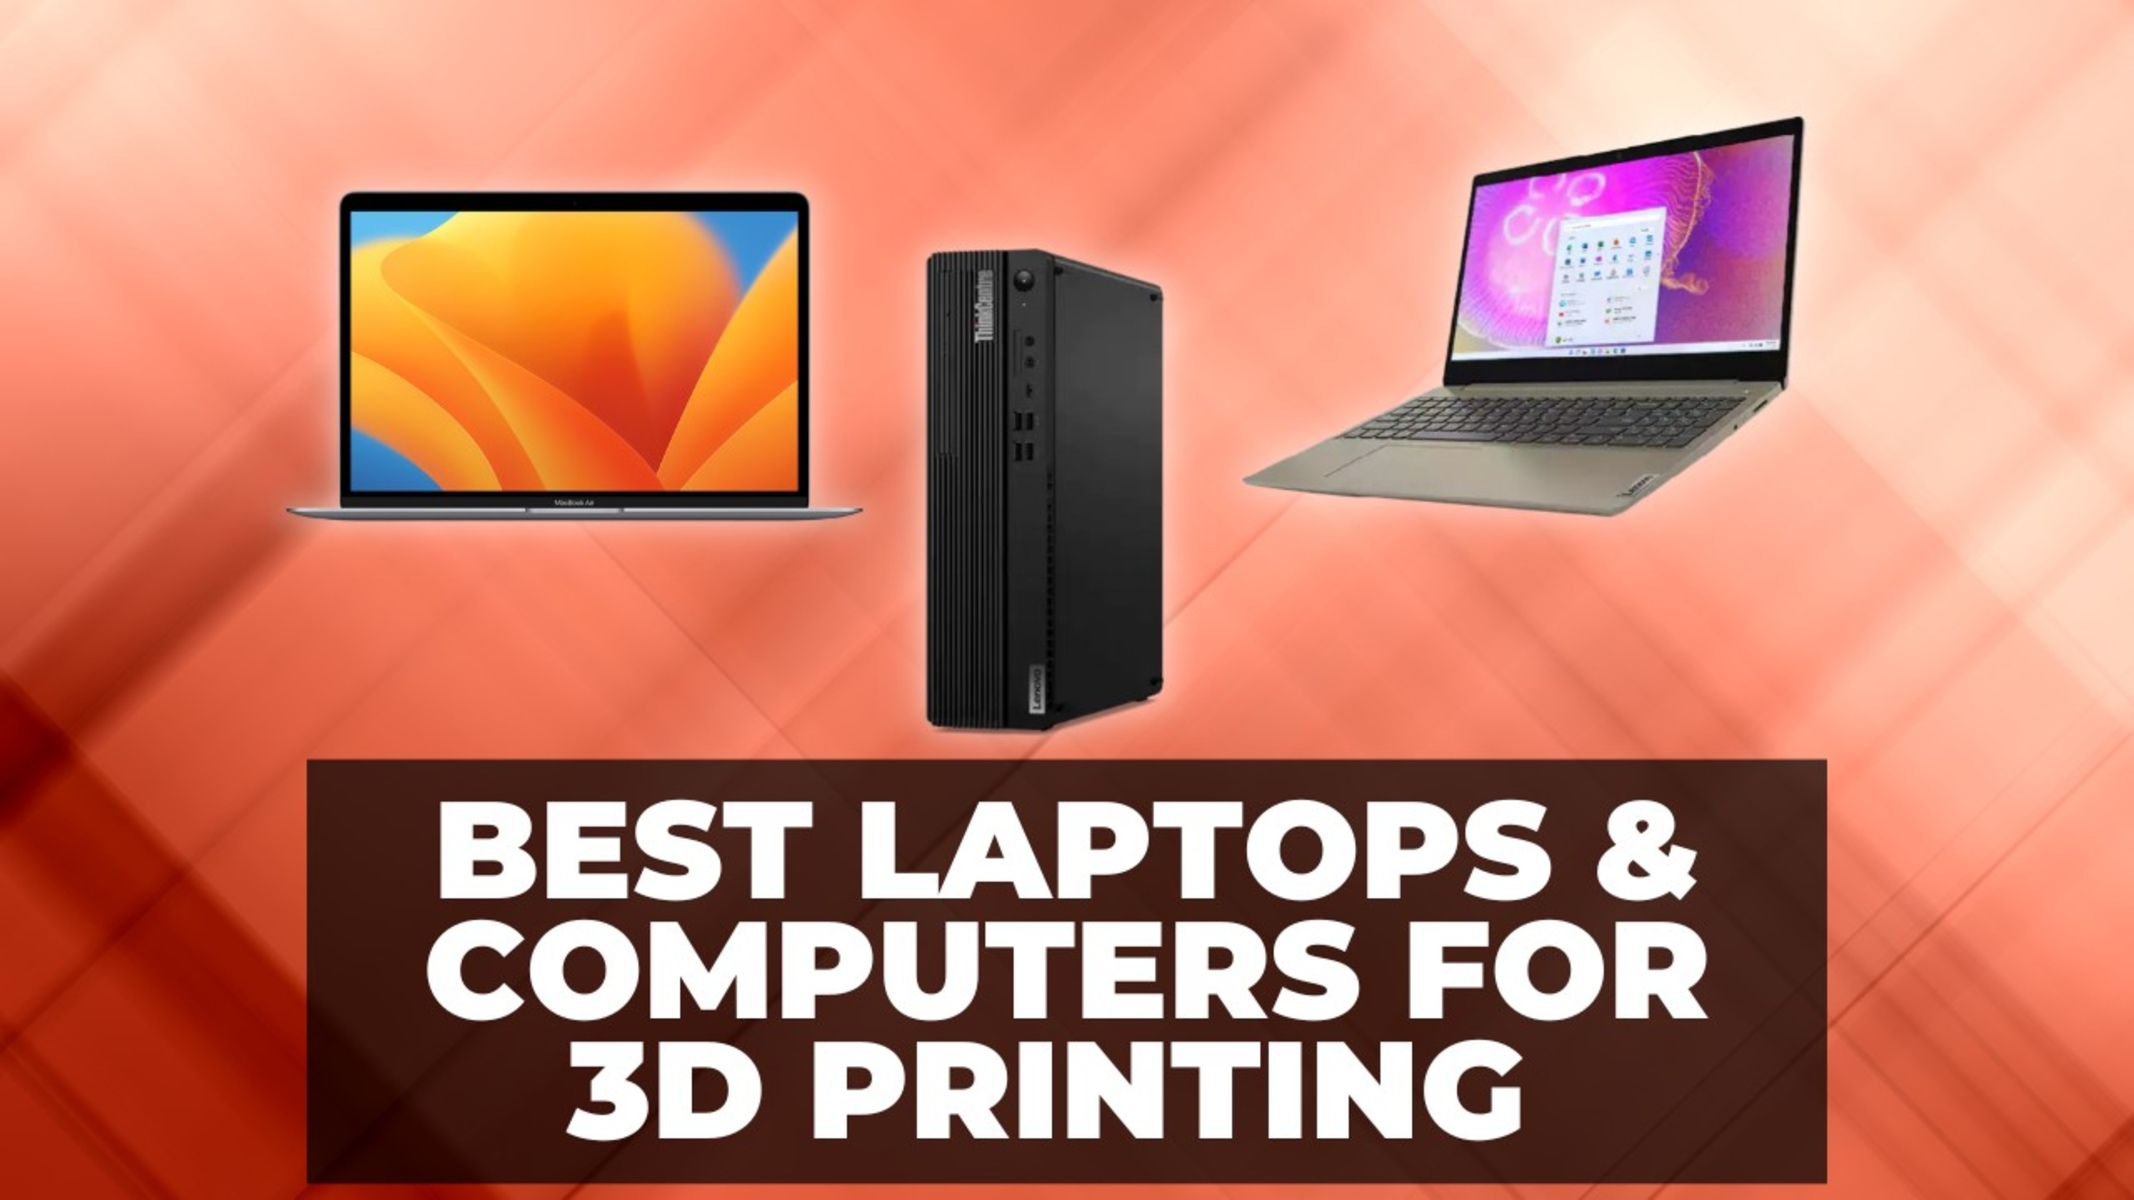 What Is The Best Computer For 3D Printing